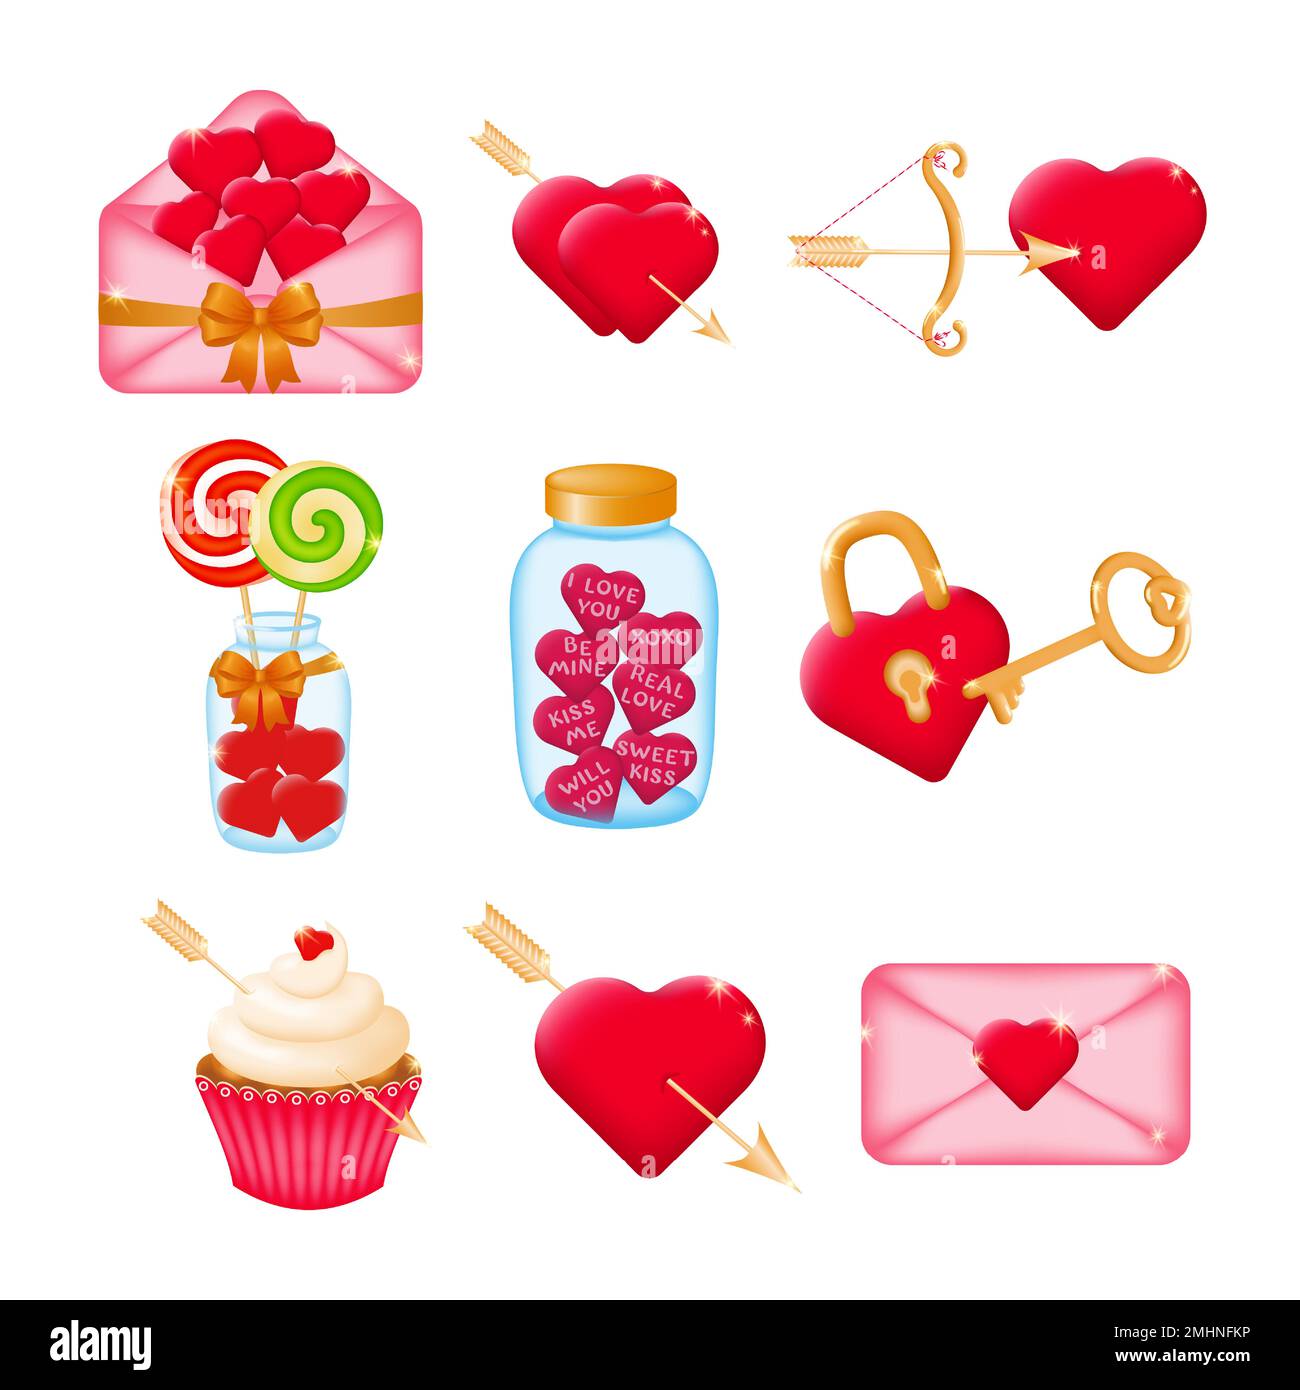 Set of 3D icons for Valentines Day on a white background. Heart love symbols, love message, red heart lock with key, cupids bow and arrow, jar of hear Stock Vector